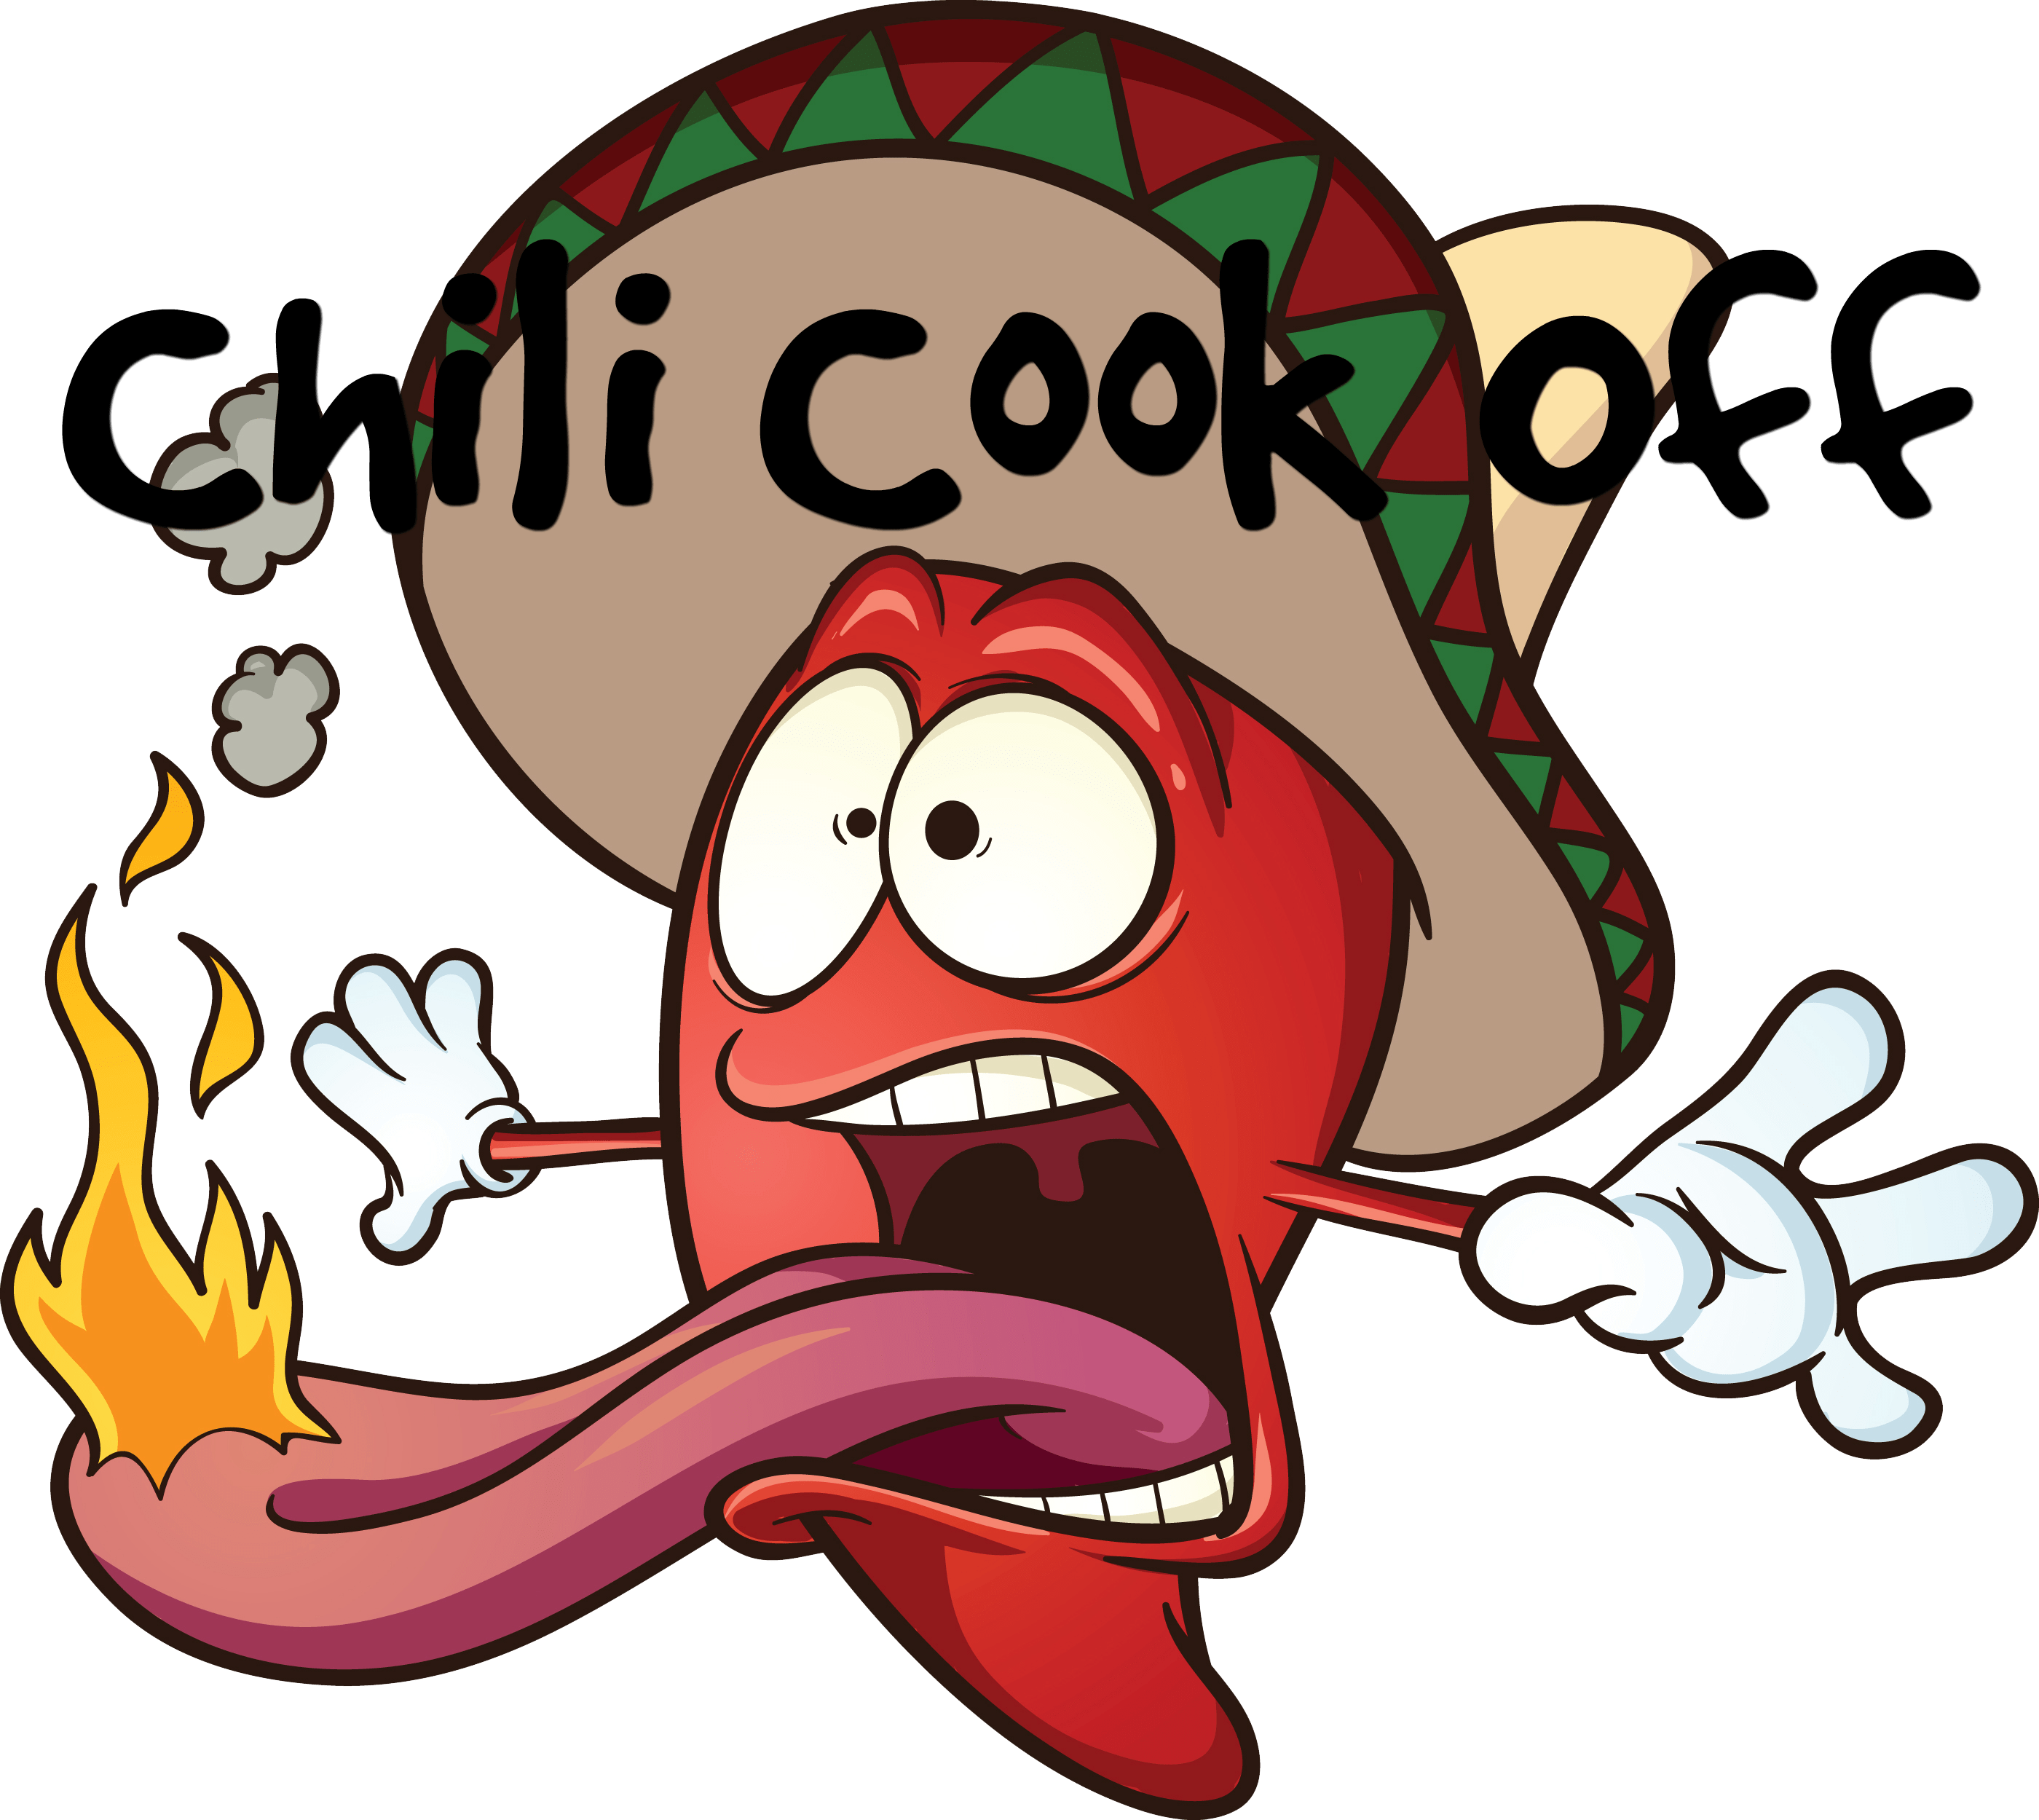 Chili Cook Off Clipart - Spicy Cartoon.